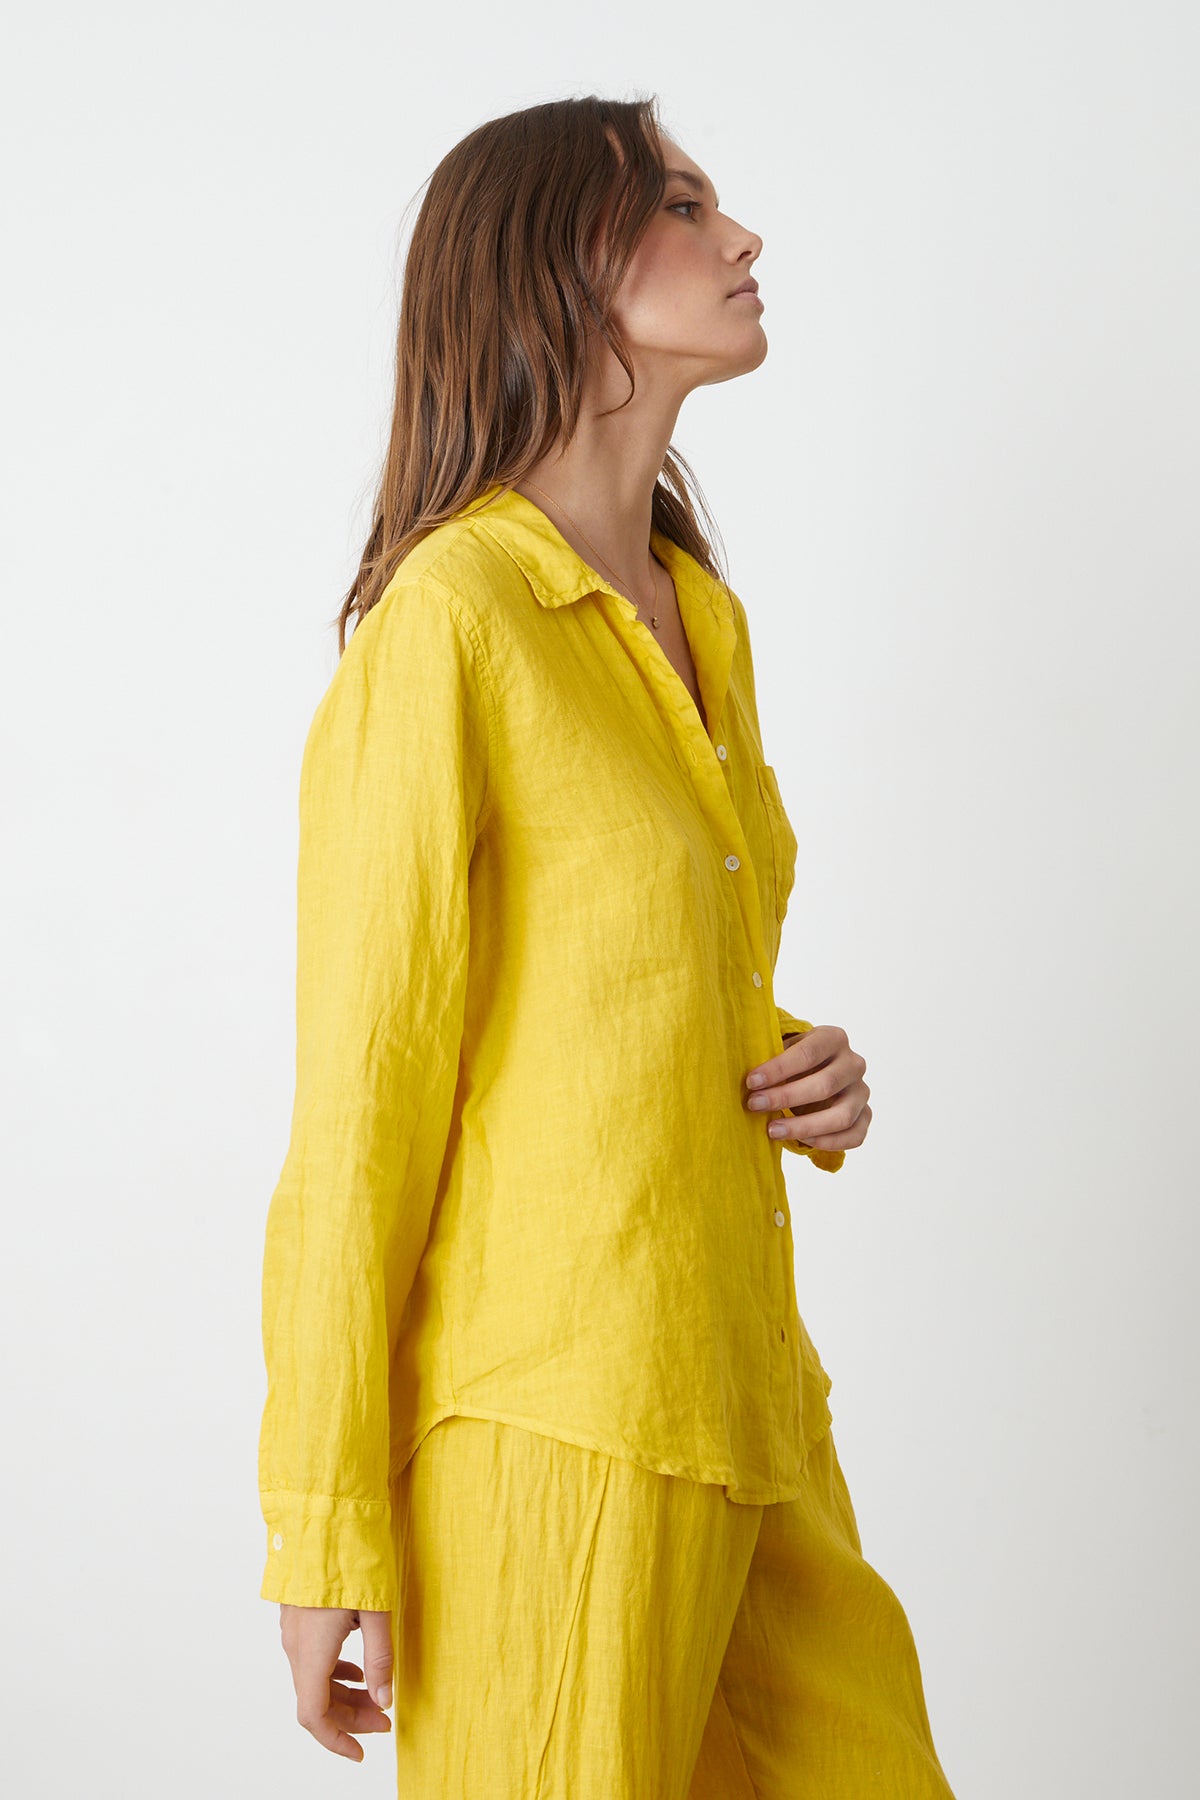 Natalia Button-Up Shirt in bright yellow sun colored linen with Lola pant side-26255711371457